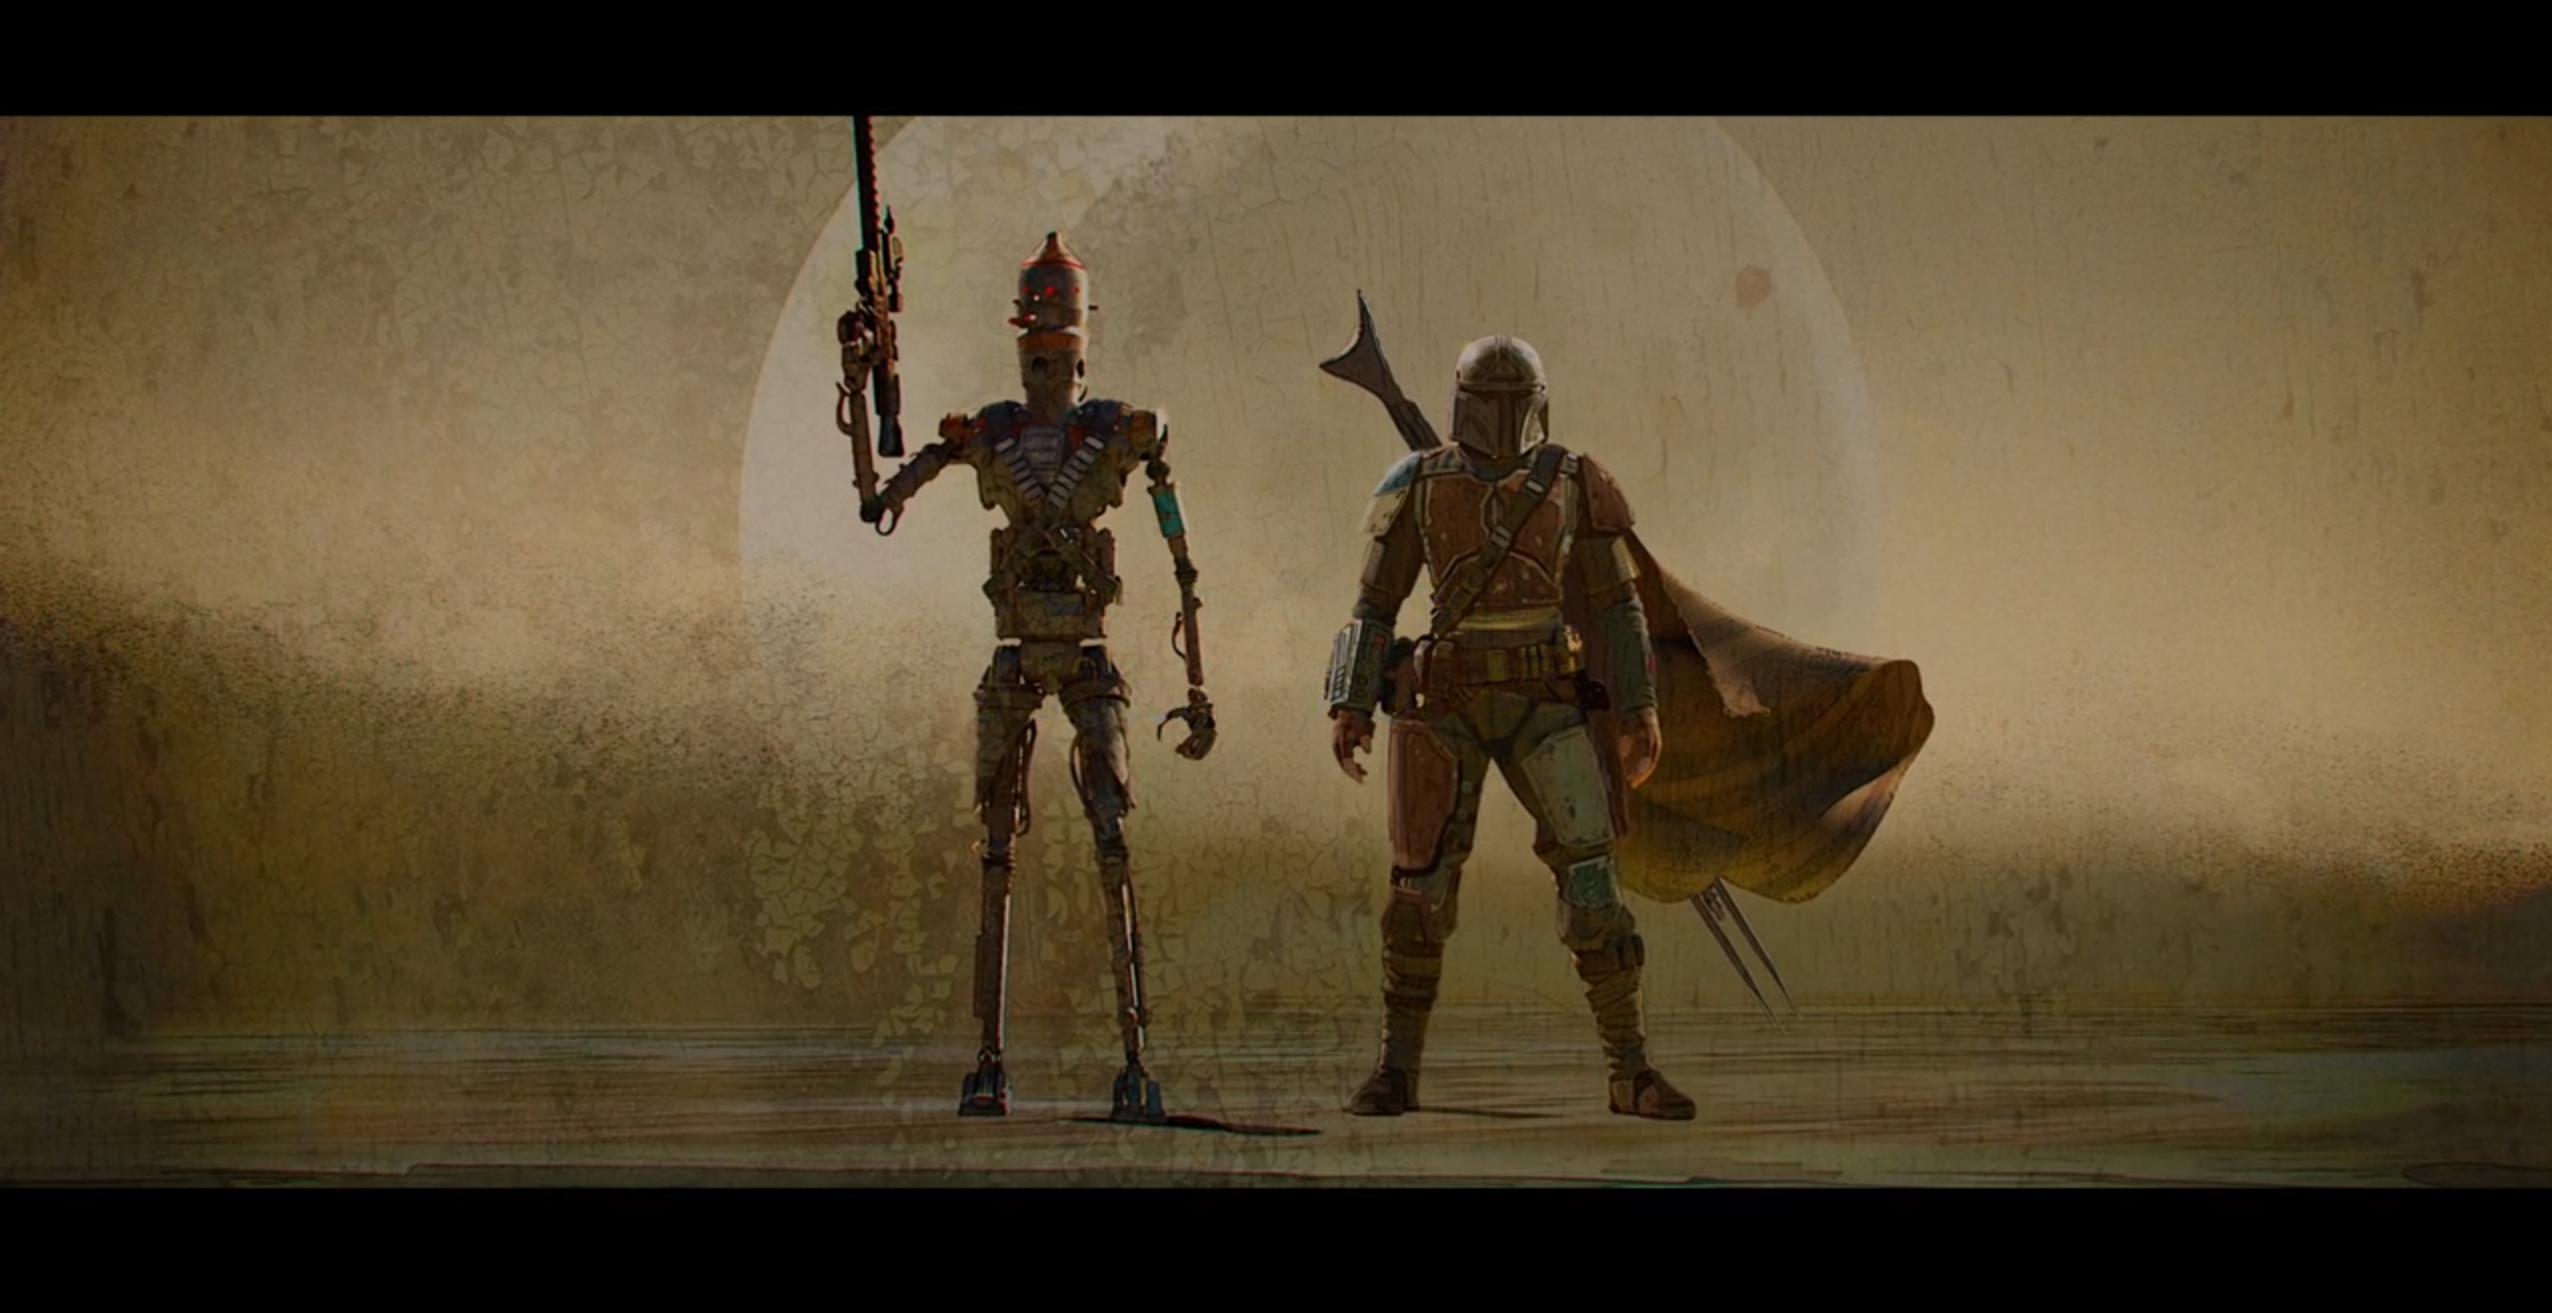 The Mandalorian wallpaper. The show is a fantastic start to